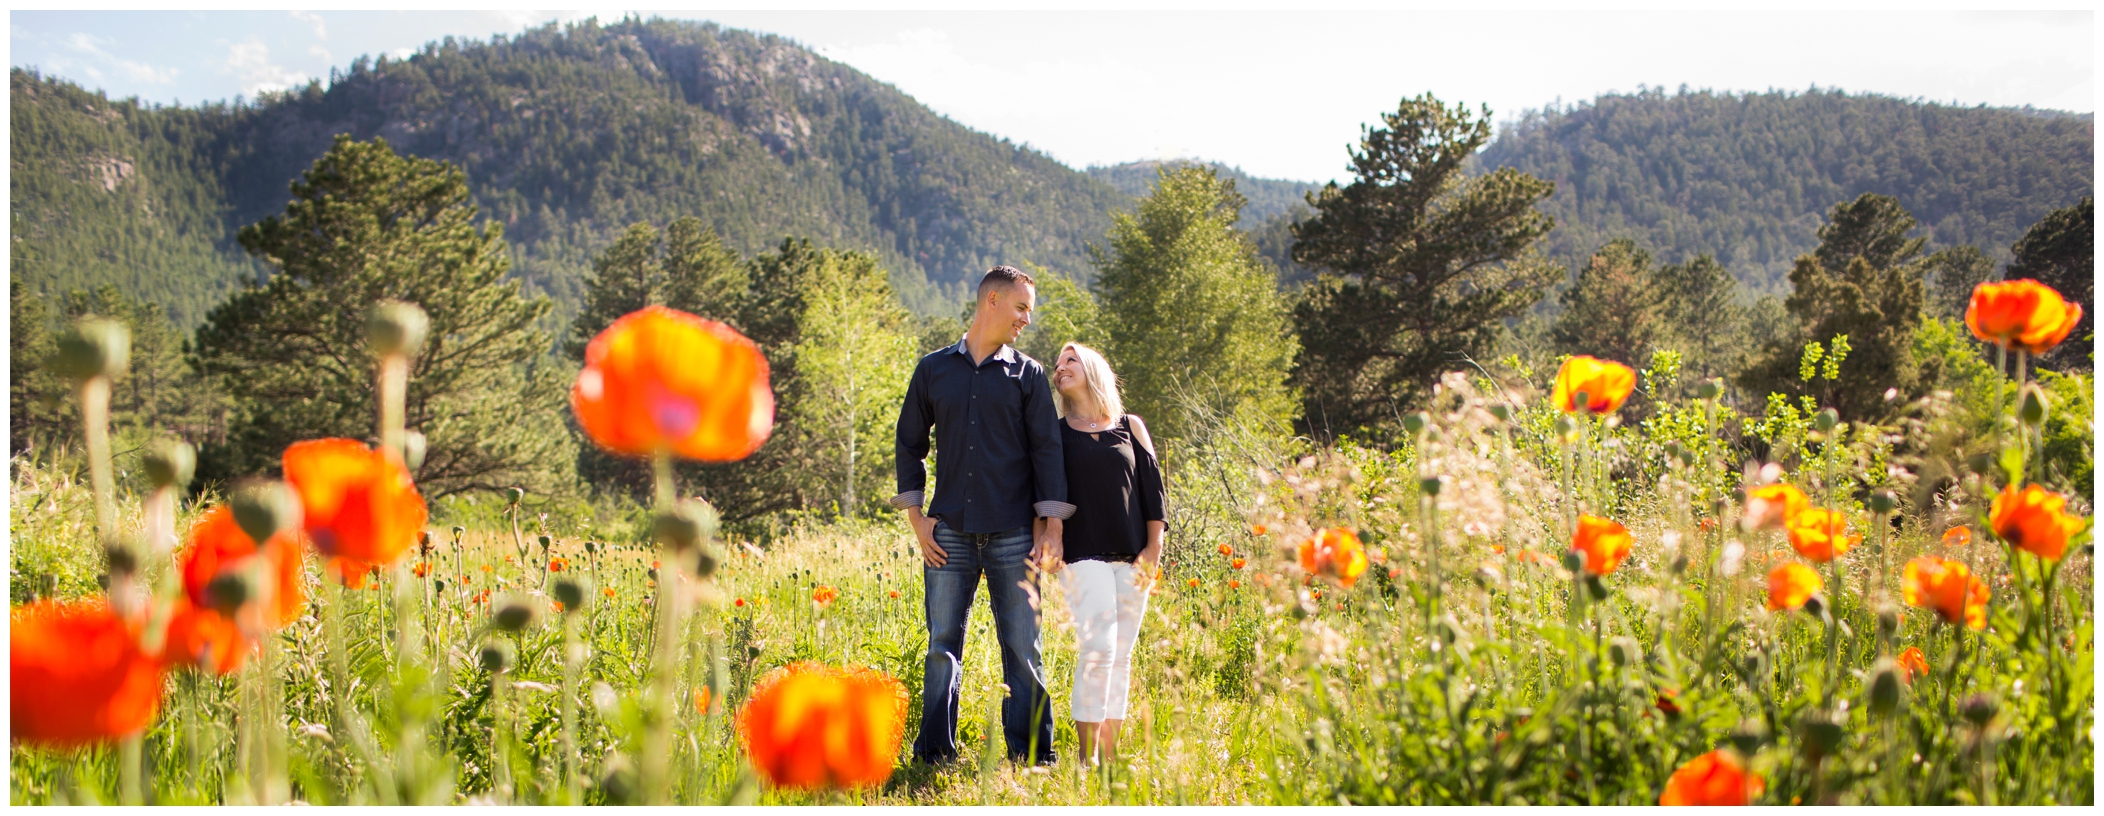 Colorado engagement photography in poppy field 